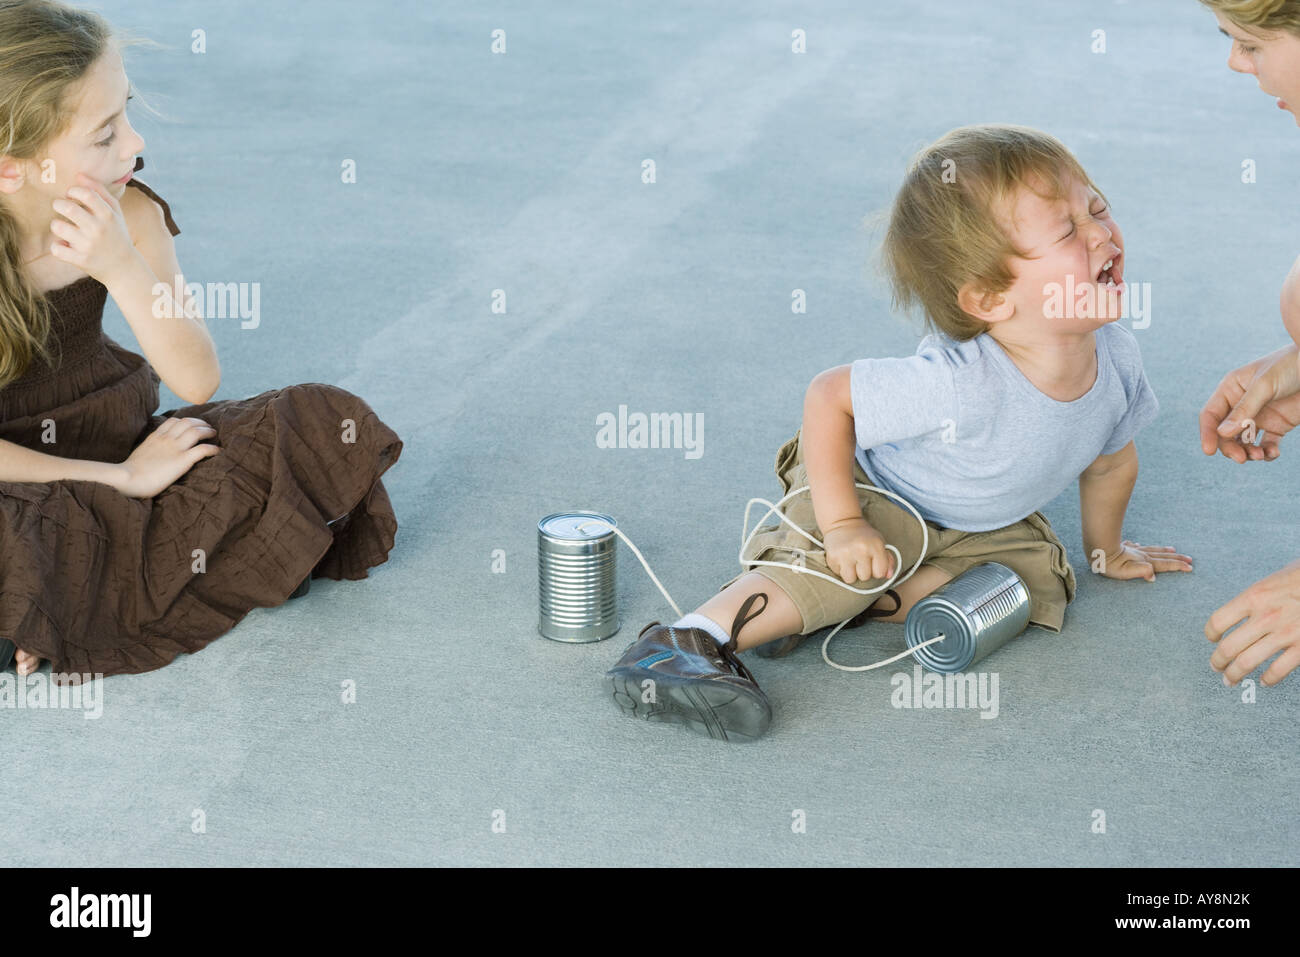 Little boy holding tin can phone, having tantrum, mother and sister watching Stock Photo